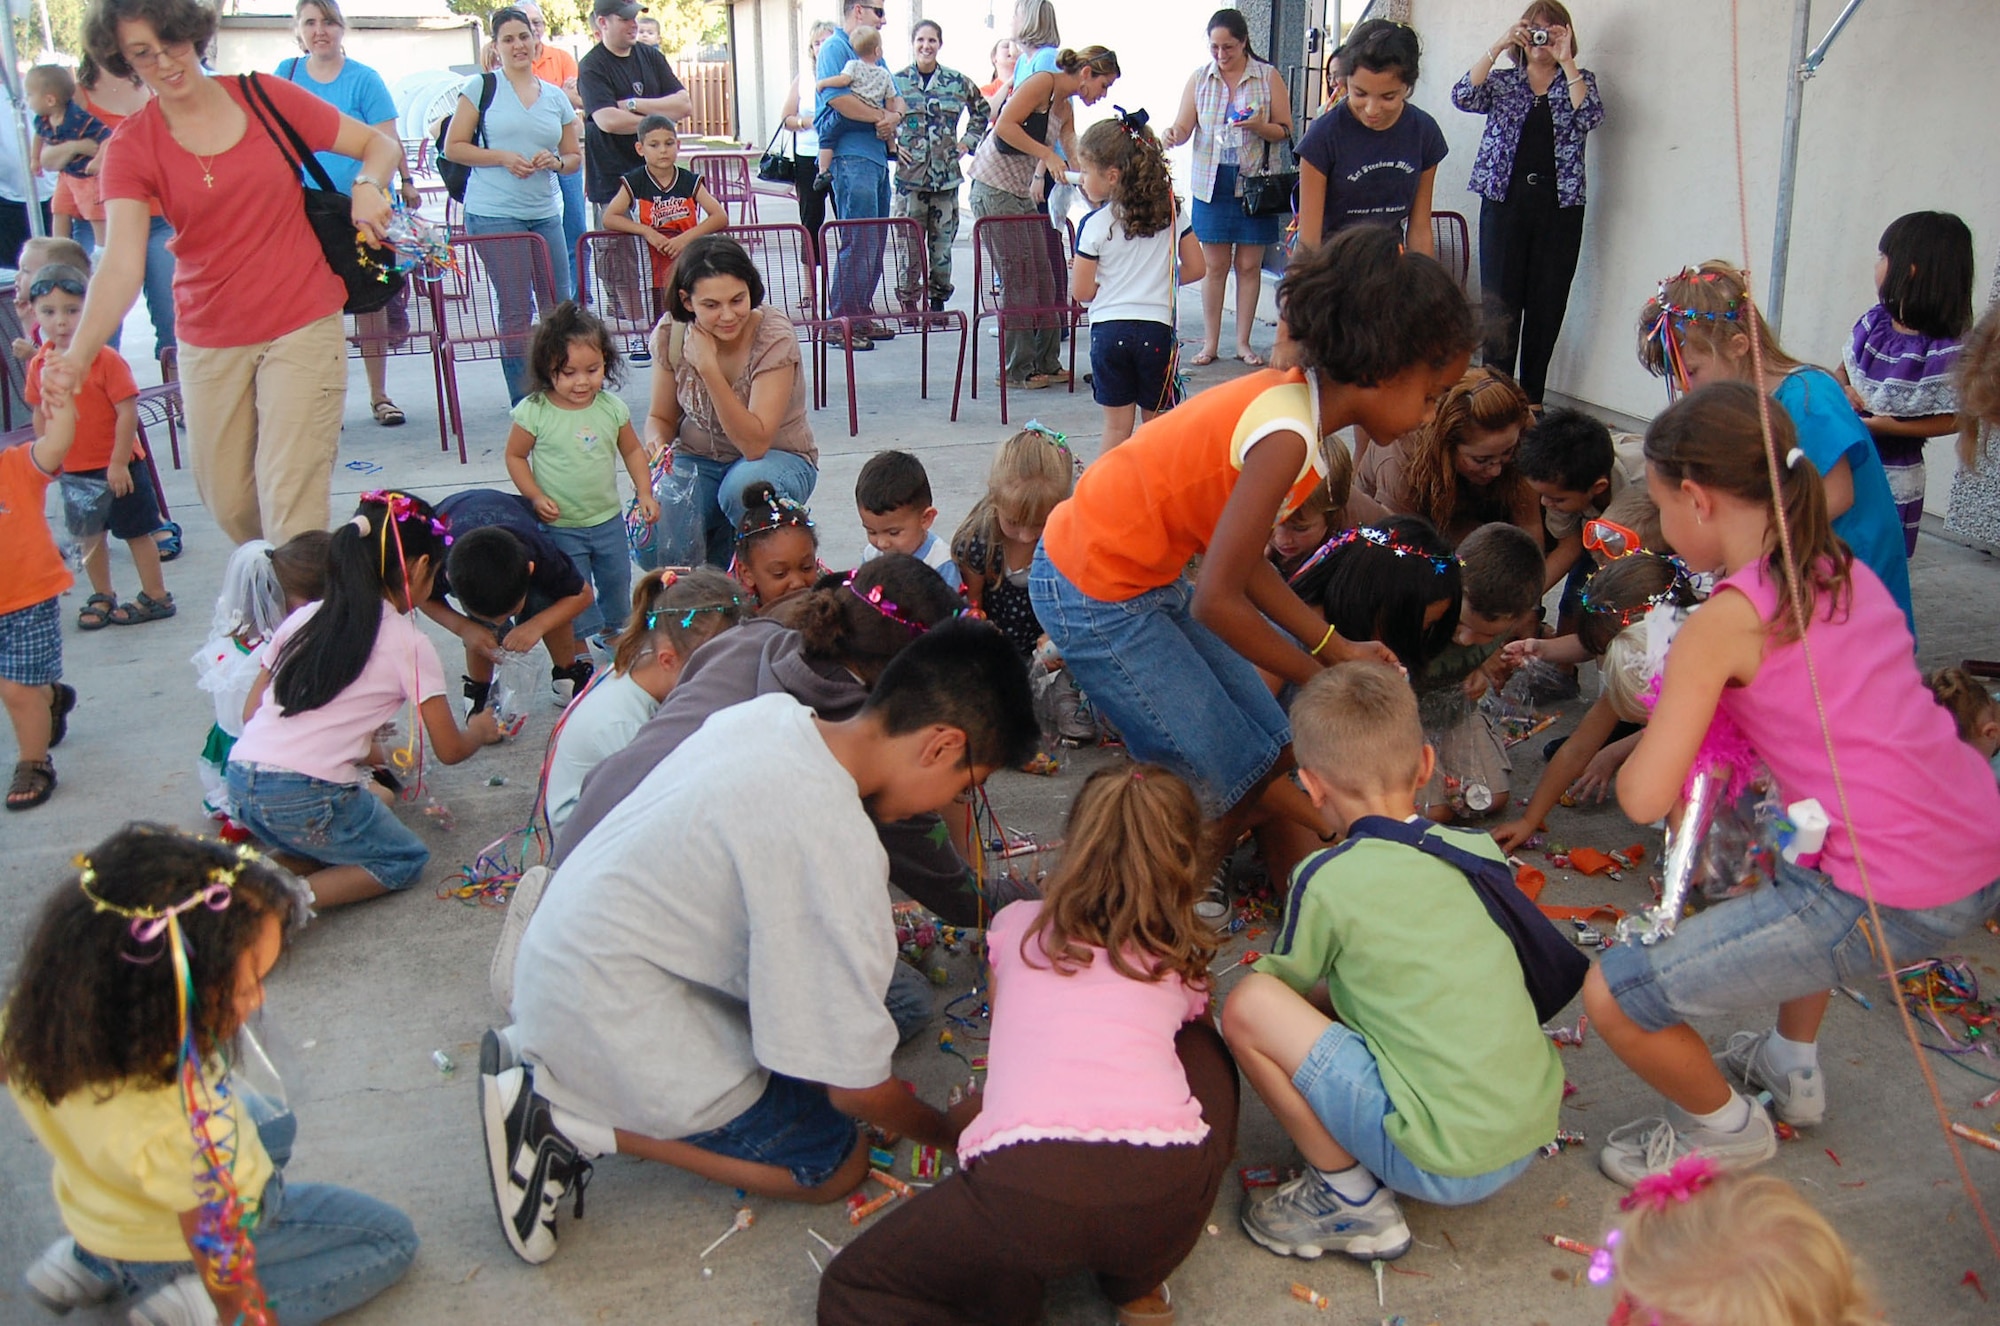 LAUGHLIN AIR FORCE BASE, Texas -- A swarm of children rushed to collect candy when the piñata was broken on the patio of Club Amistad during the Children's Fiesta October 4. By reading books and making crafts, the children were able to learn more about the Hispanic culture and why they do certain things. The Children's Fiesta was held on behalf of October being Hispanic Heritage month. (U.S. Air Force photo by Airman Sara Csurilla)